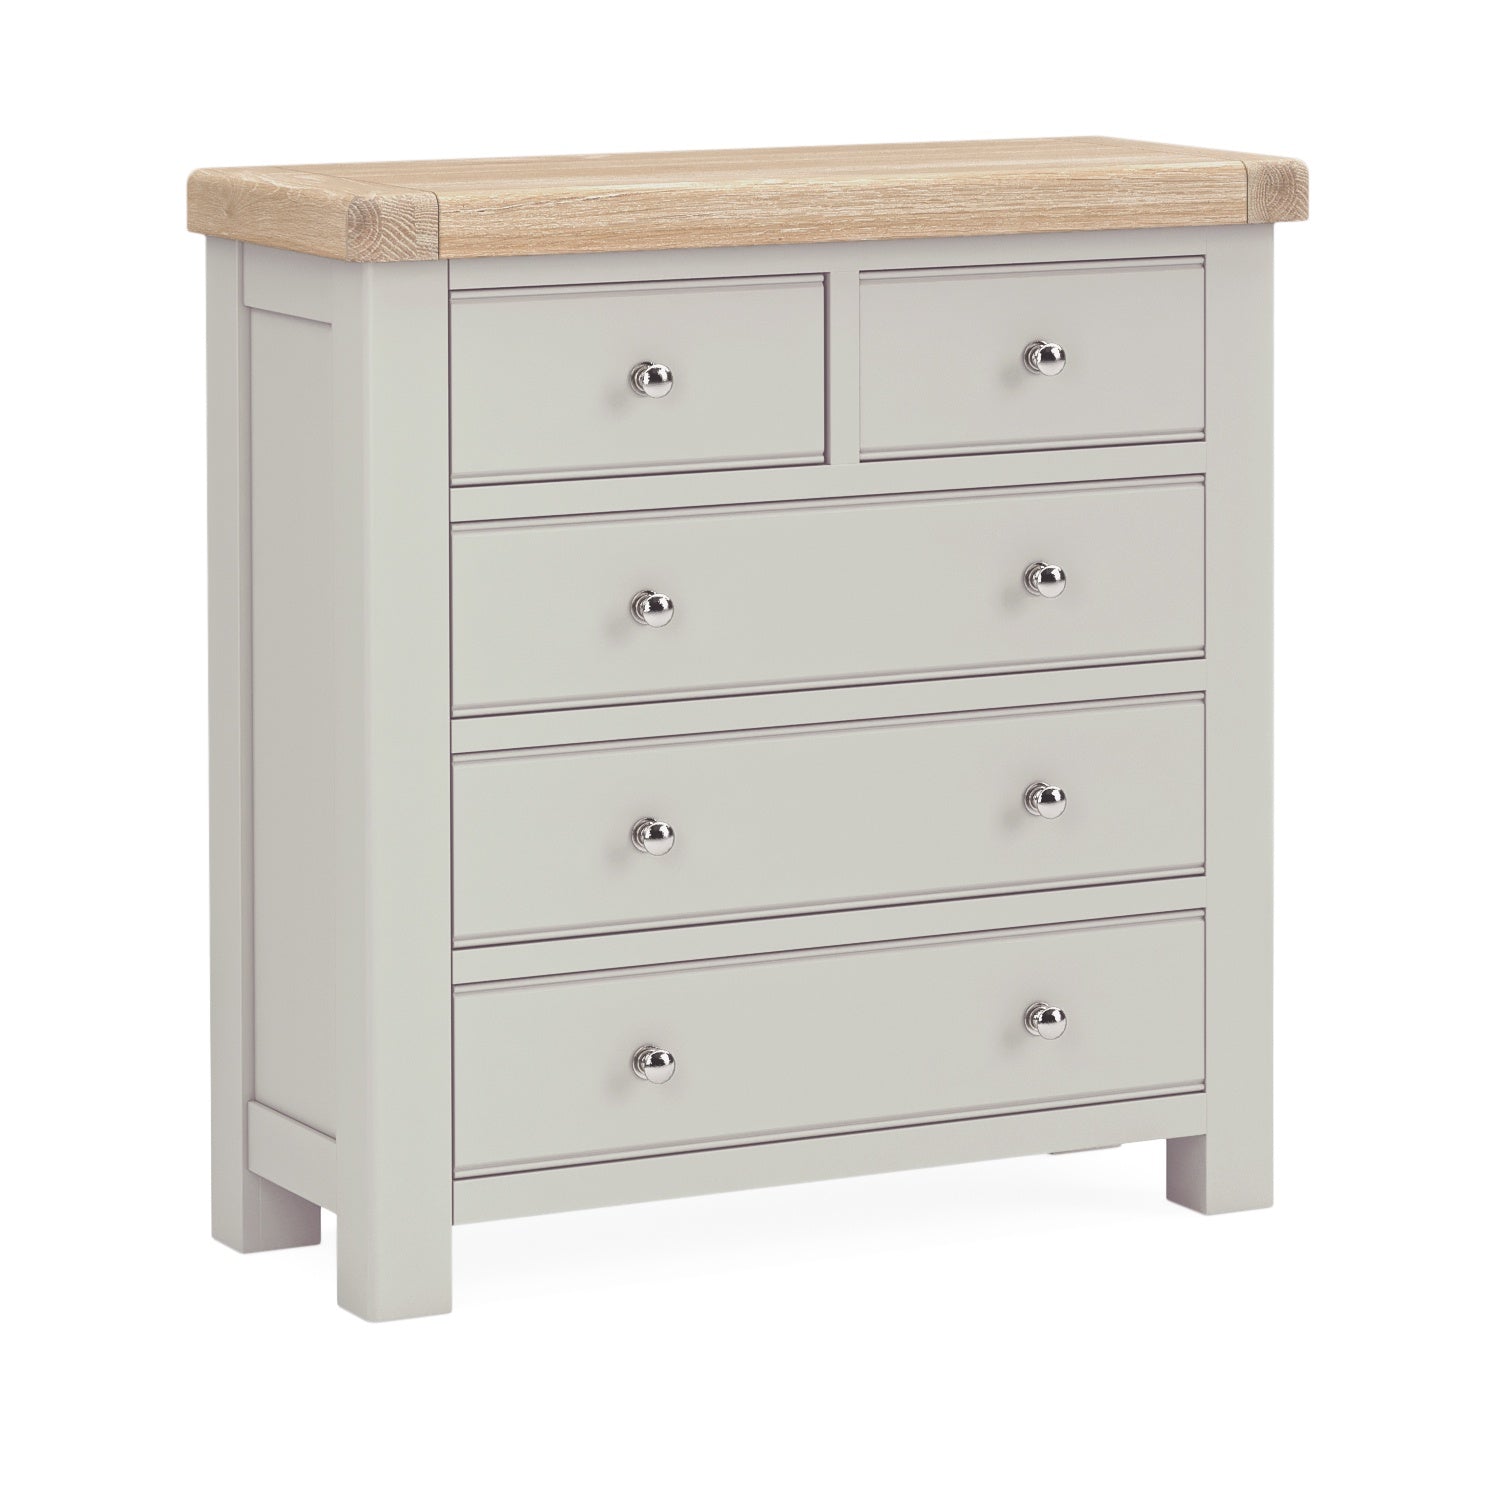 Provence Oak Stone Grey 2 Over 3 Chest Of Drawers.